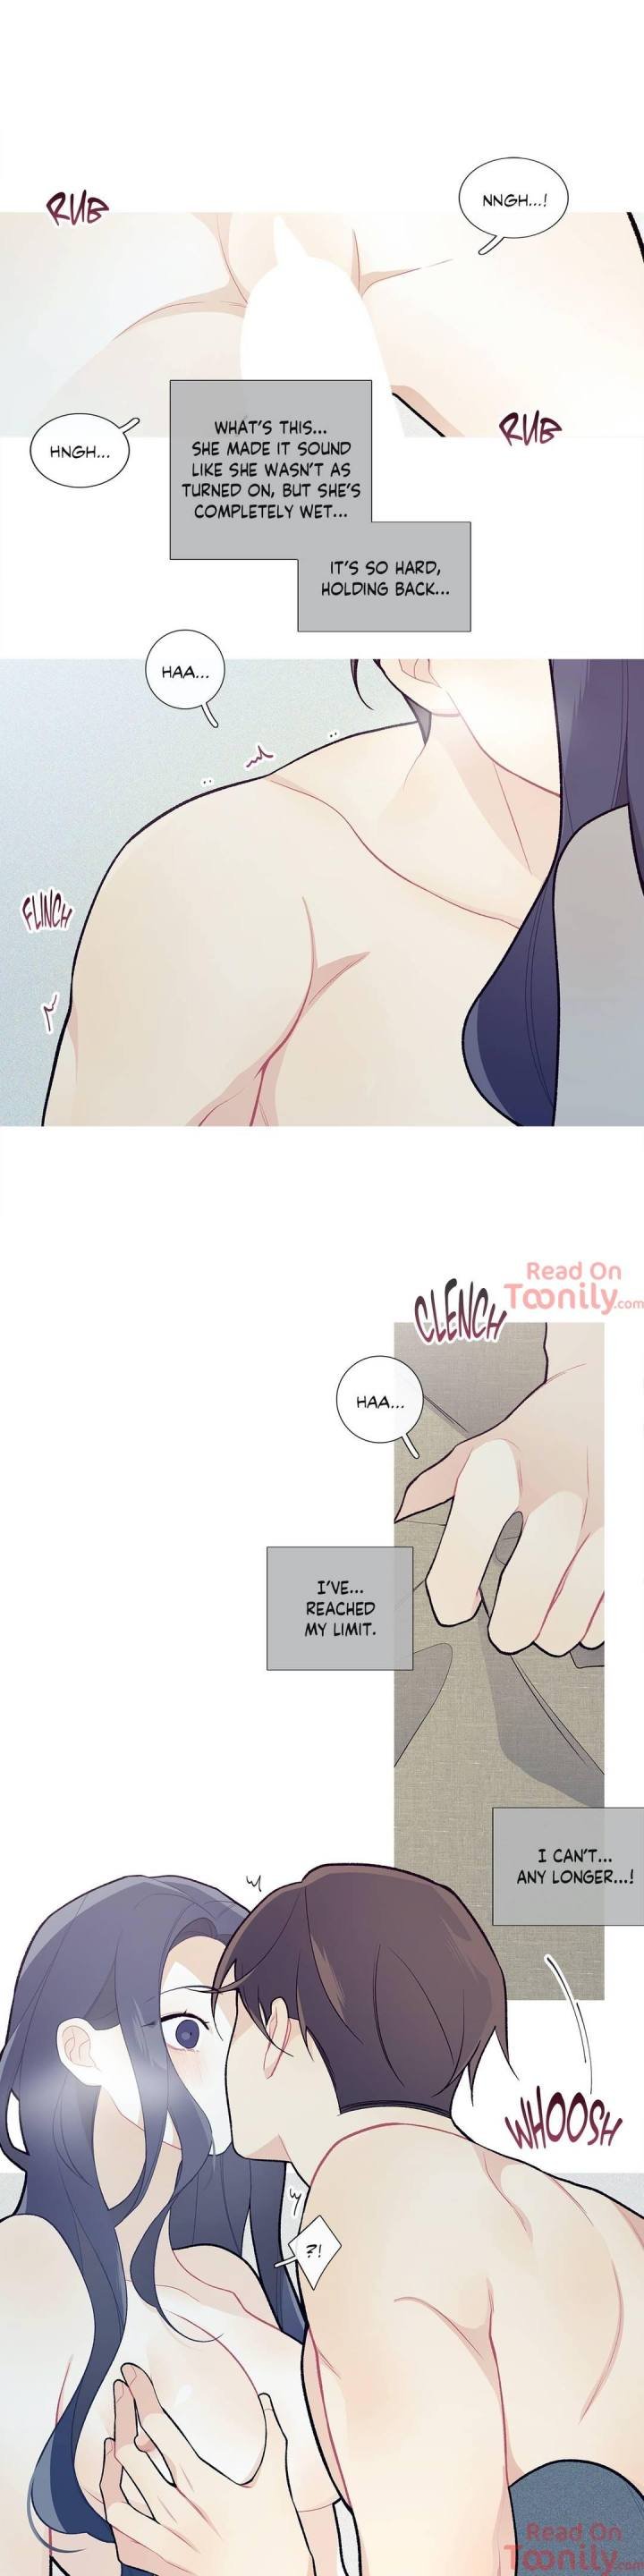 whats-going-on-chap-38-15